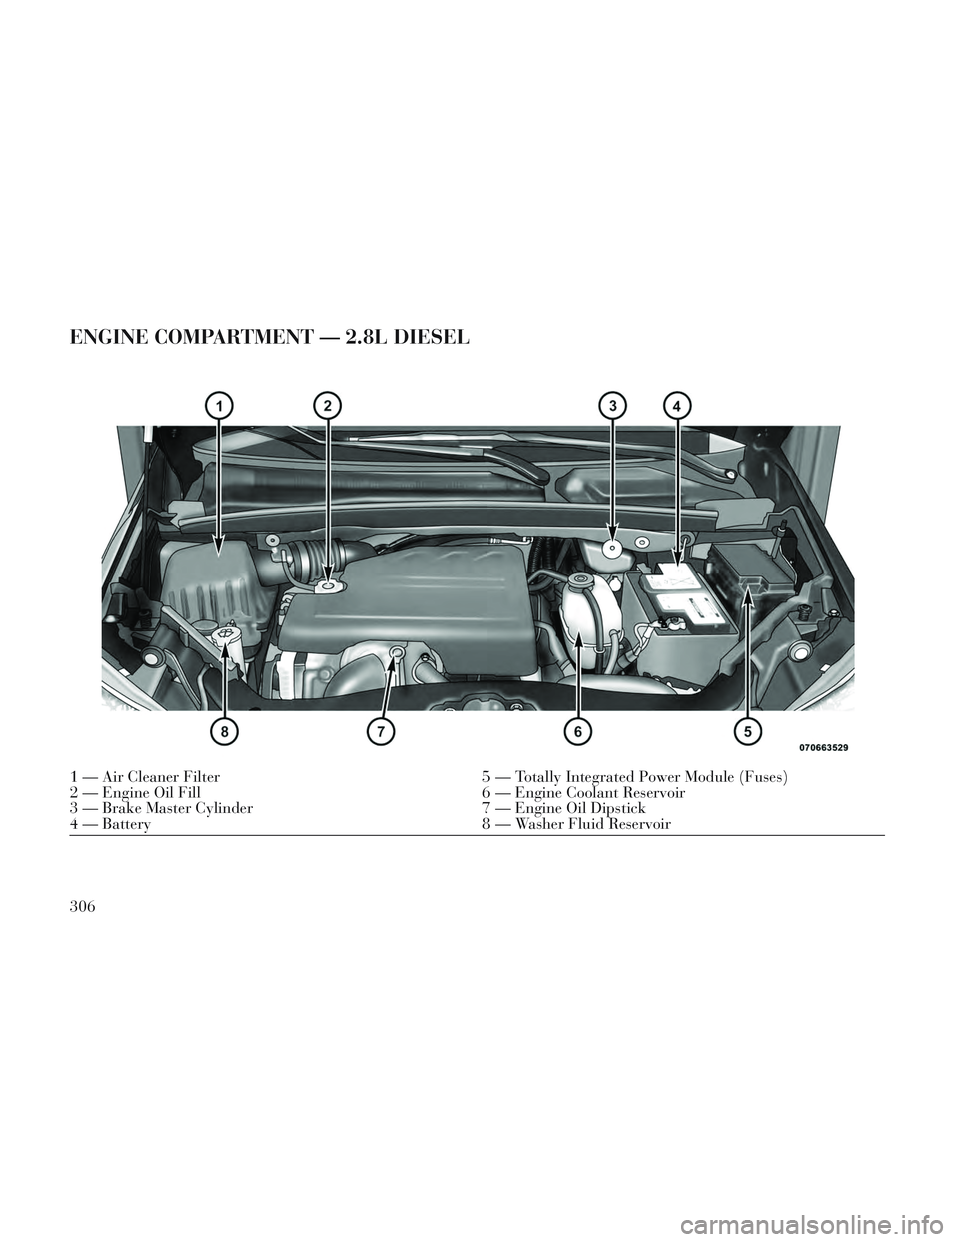 Lancia Voyager 2014  Owner handbook (in English) ENGINE COMPARTMENT — 2.8L DIESEL
1 — Air Cleaner Filter5 — Totally Integrated Power Module (Fuses)
2 — Engine Oil Fill 6 — Engine Coolant Reservoir
3 — Brake Master Cylinder 7 — Engine O